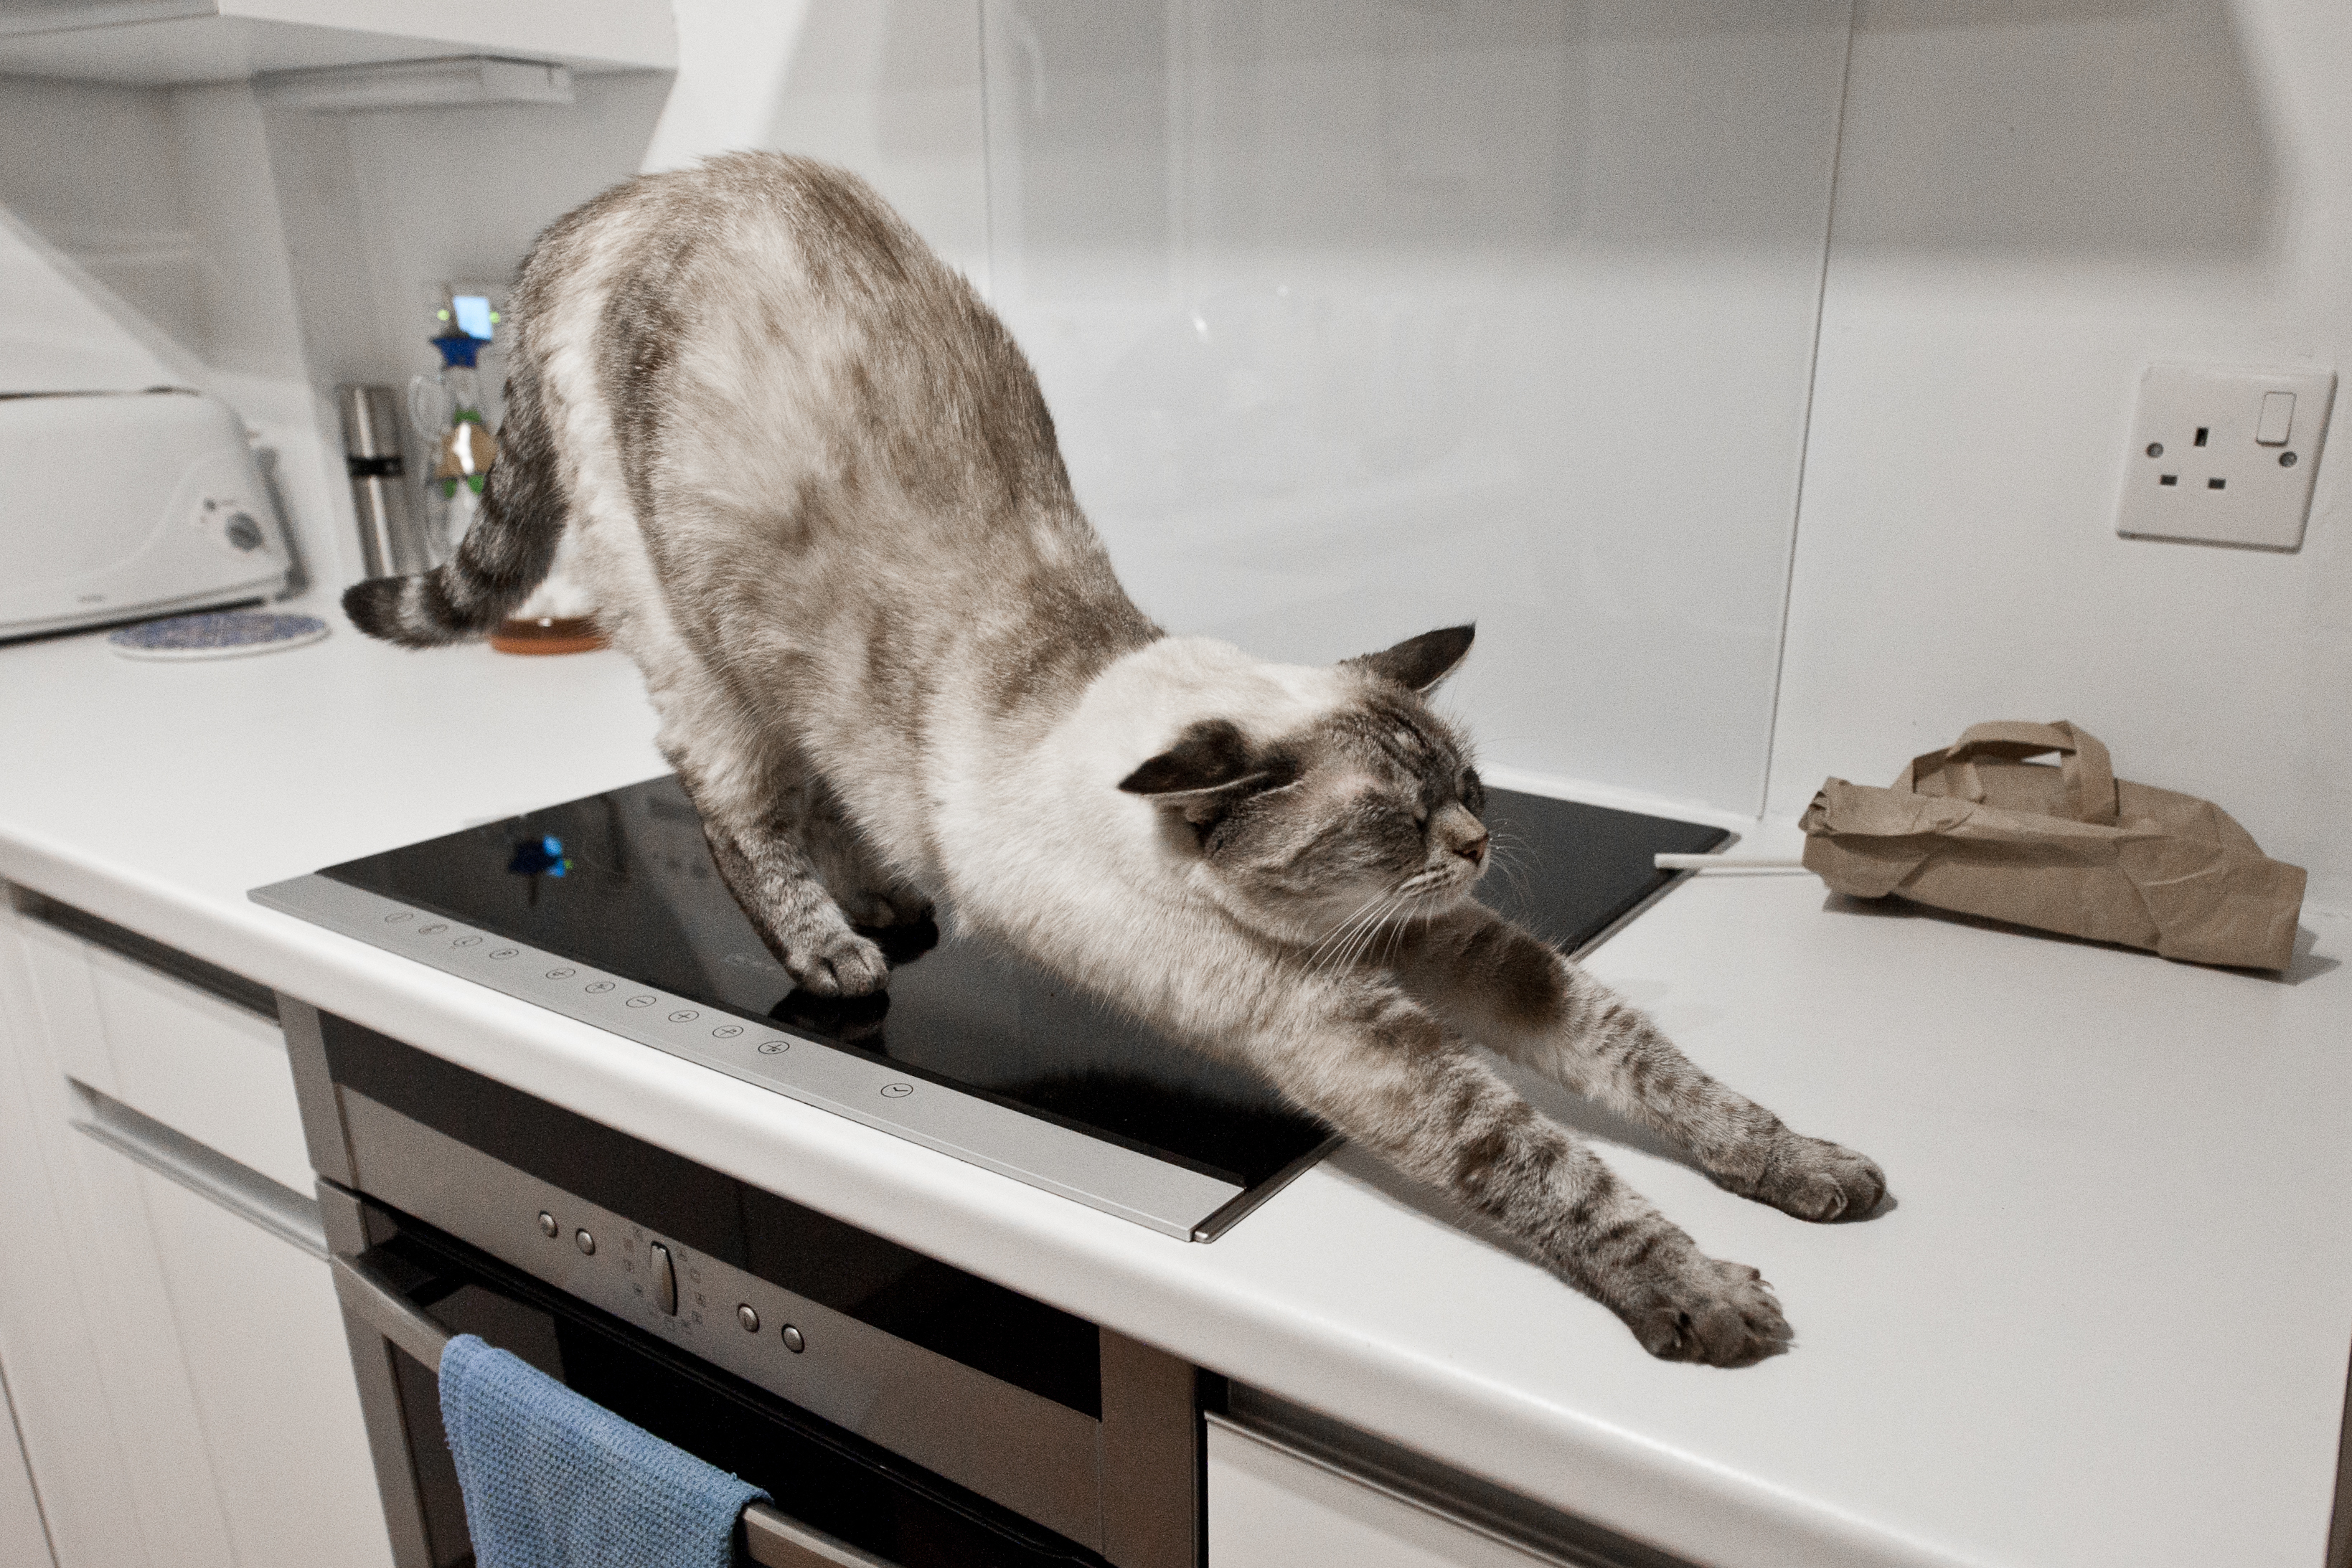 A cat walking on the stove